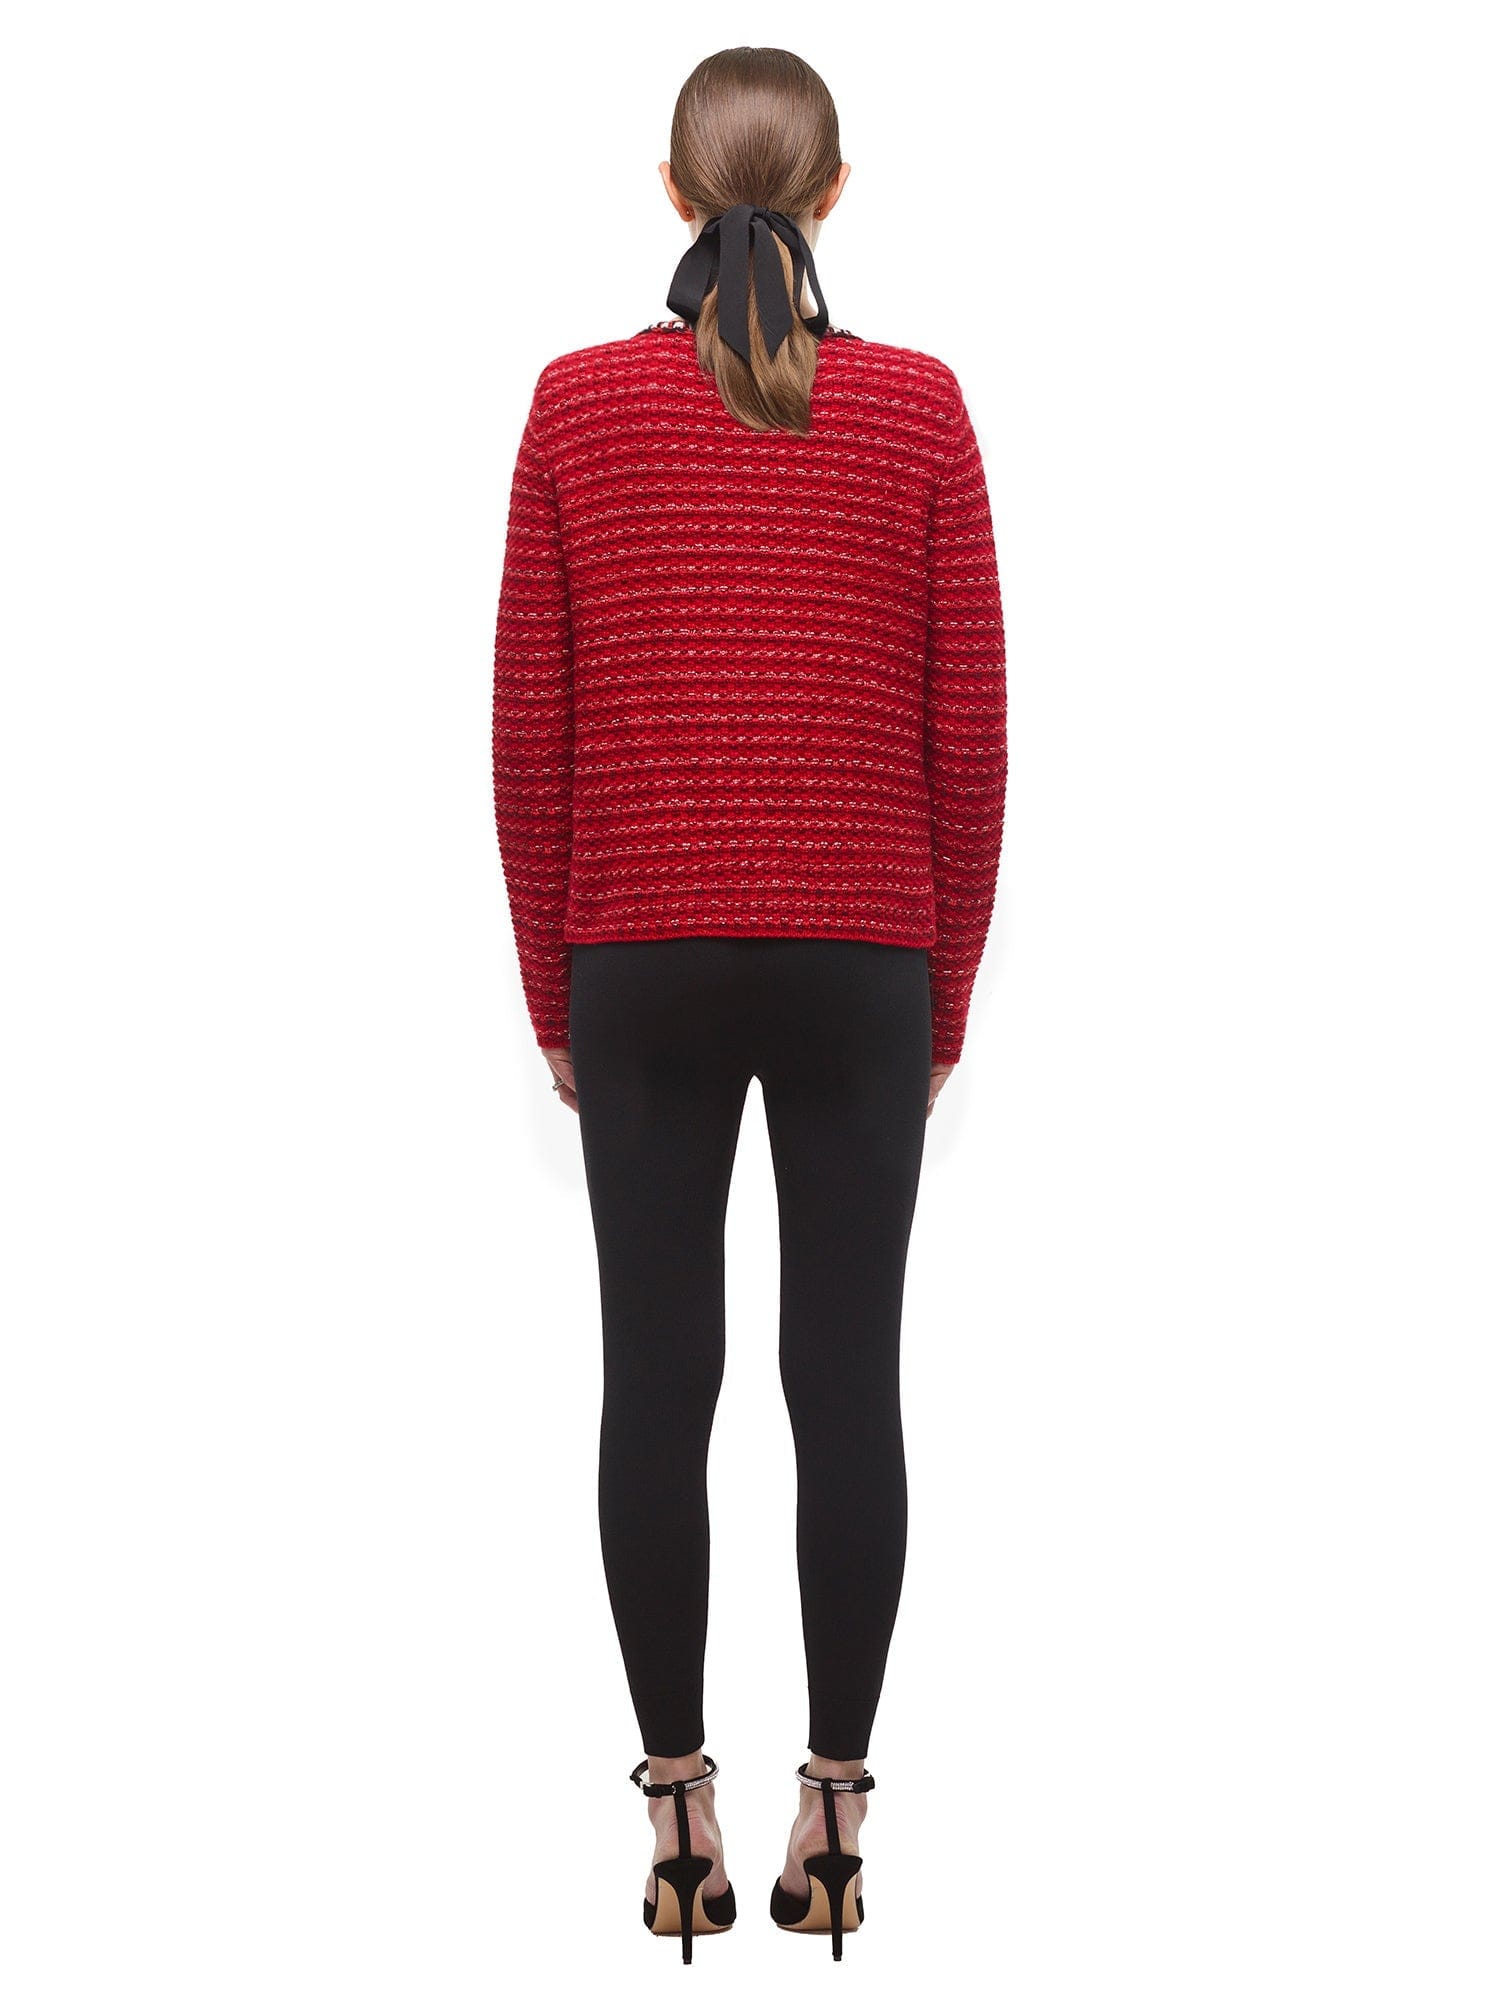 A woman wearing the Oversized Red Melange Knit Cardigan